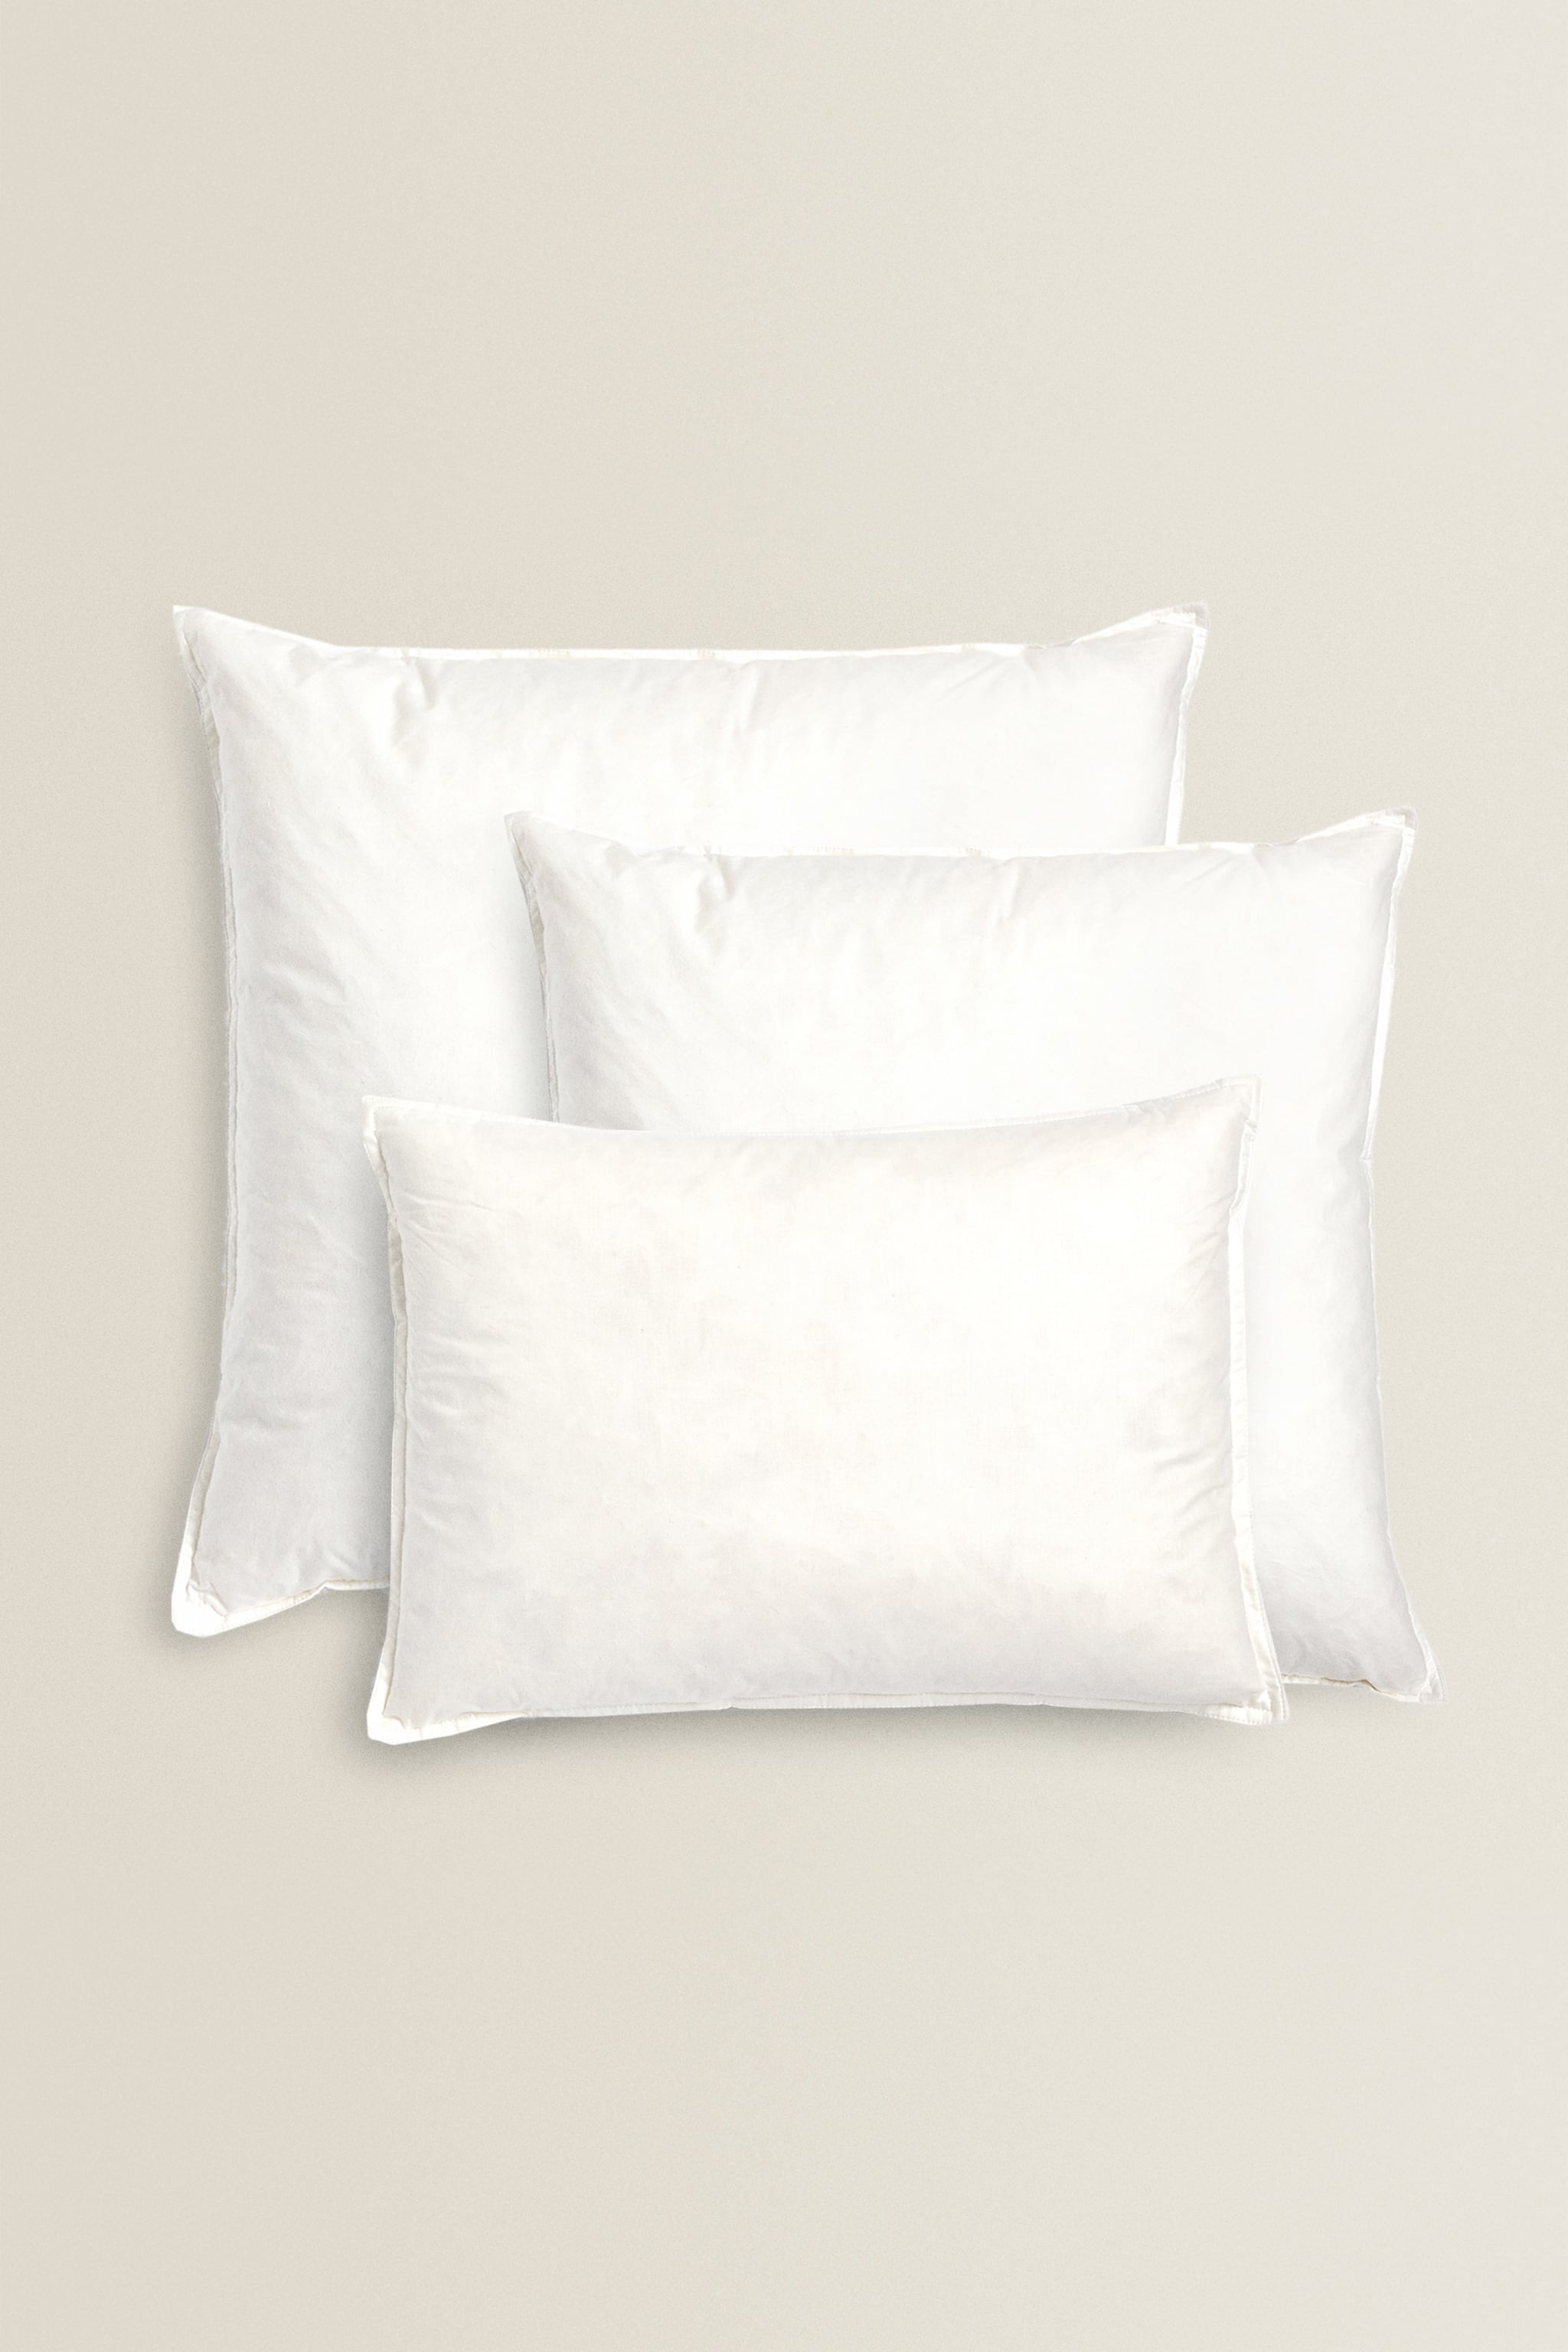 FEATHER PILLOW FILLING WITH COTTON COVER